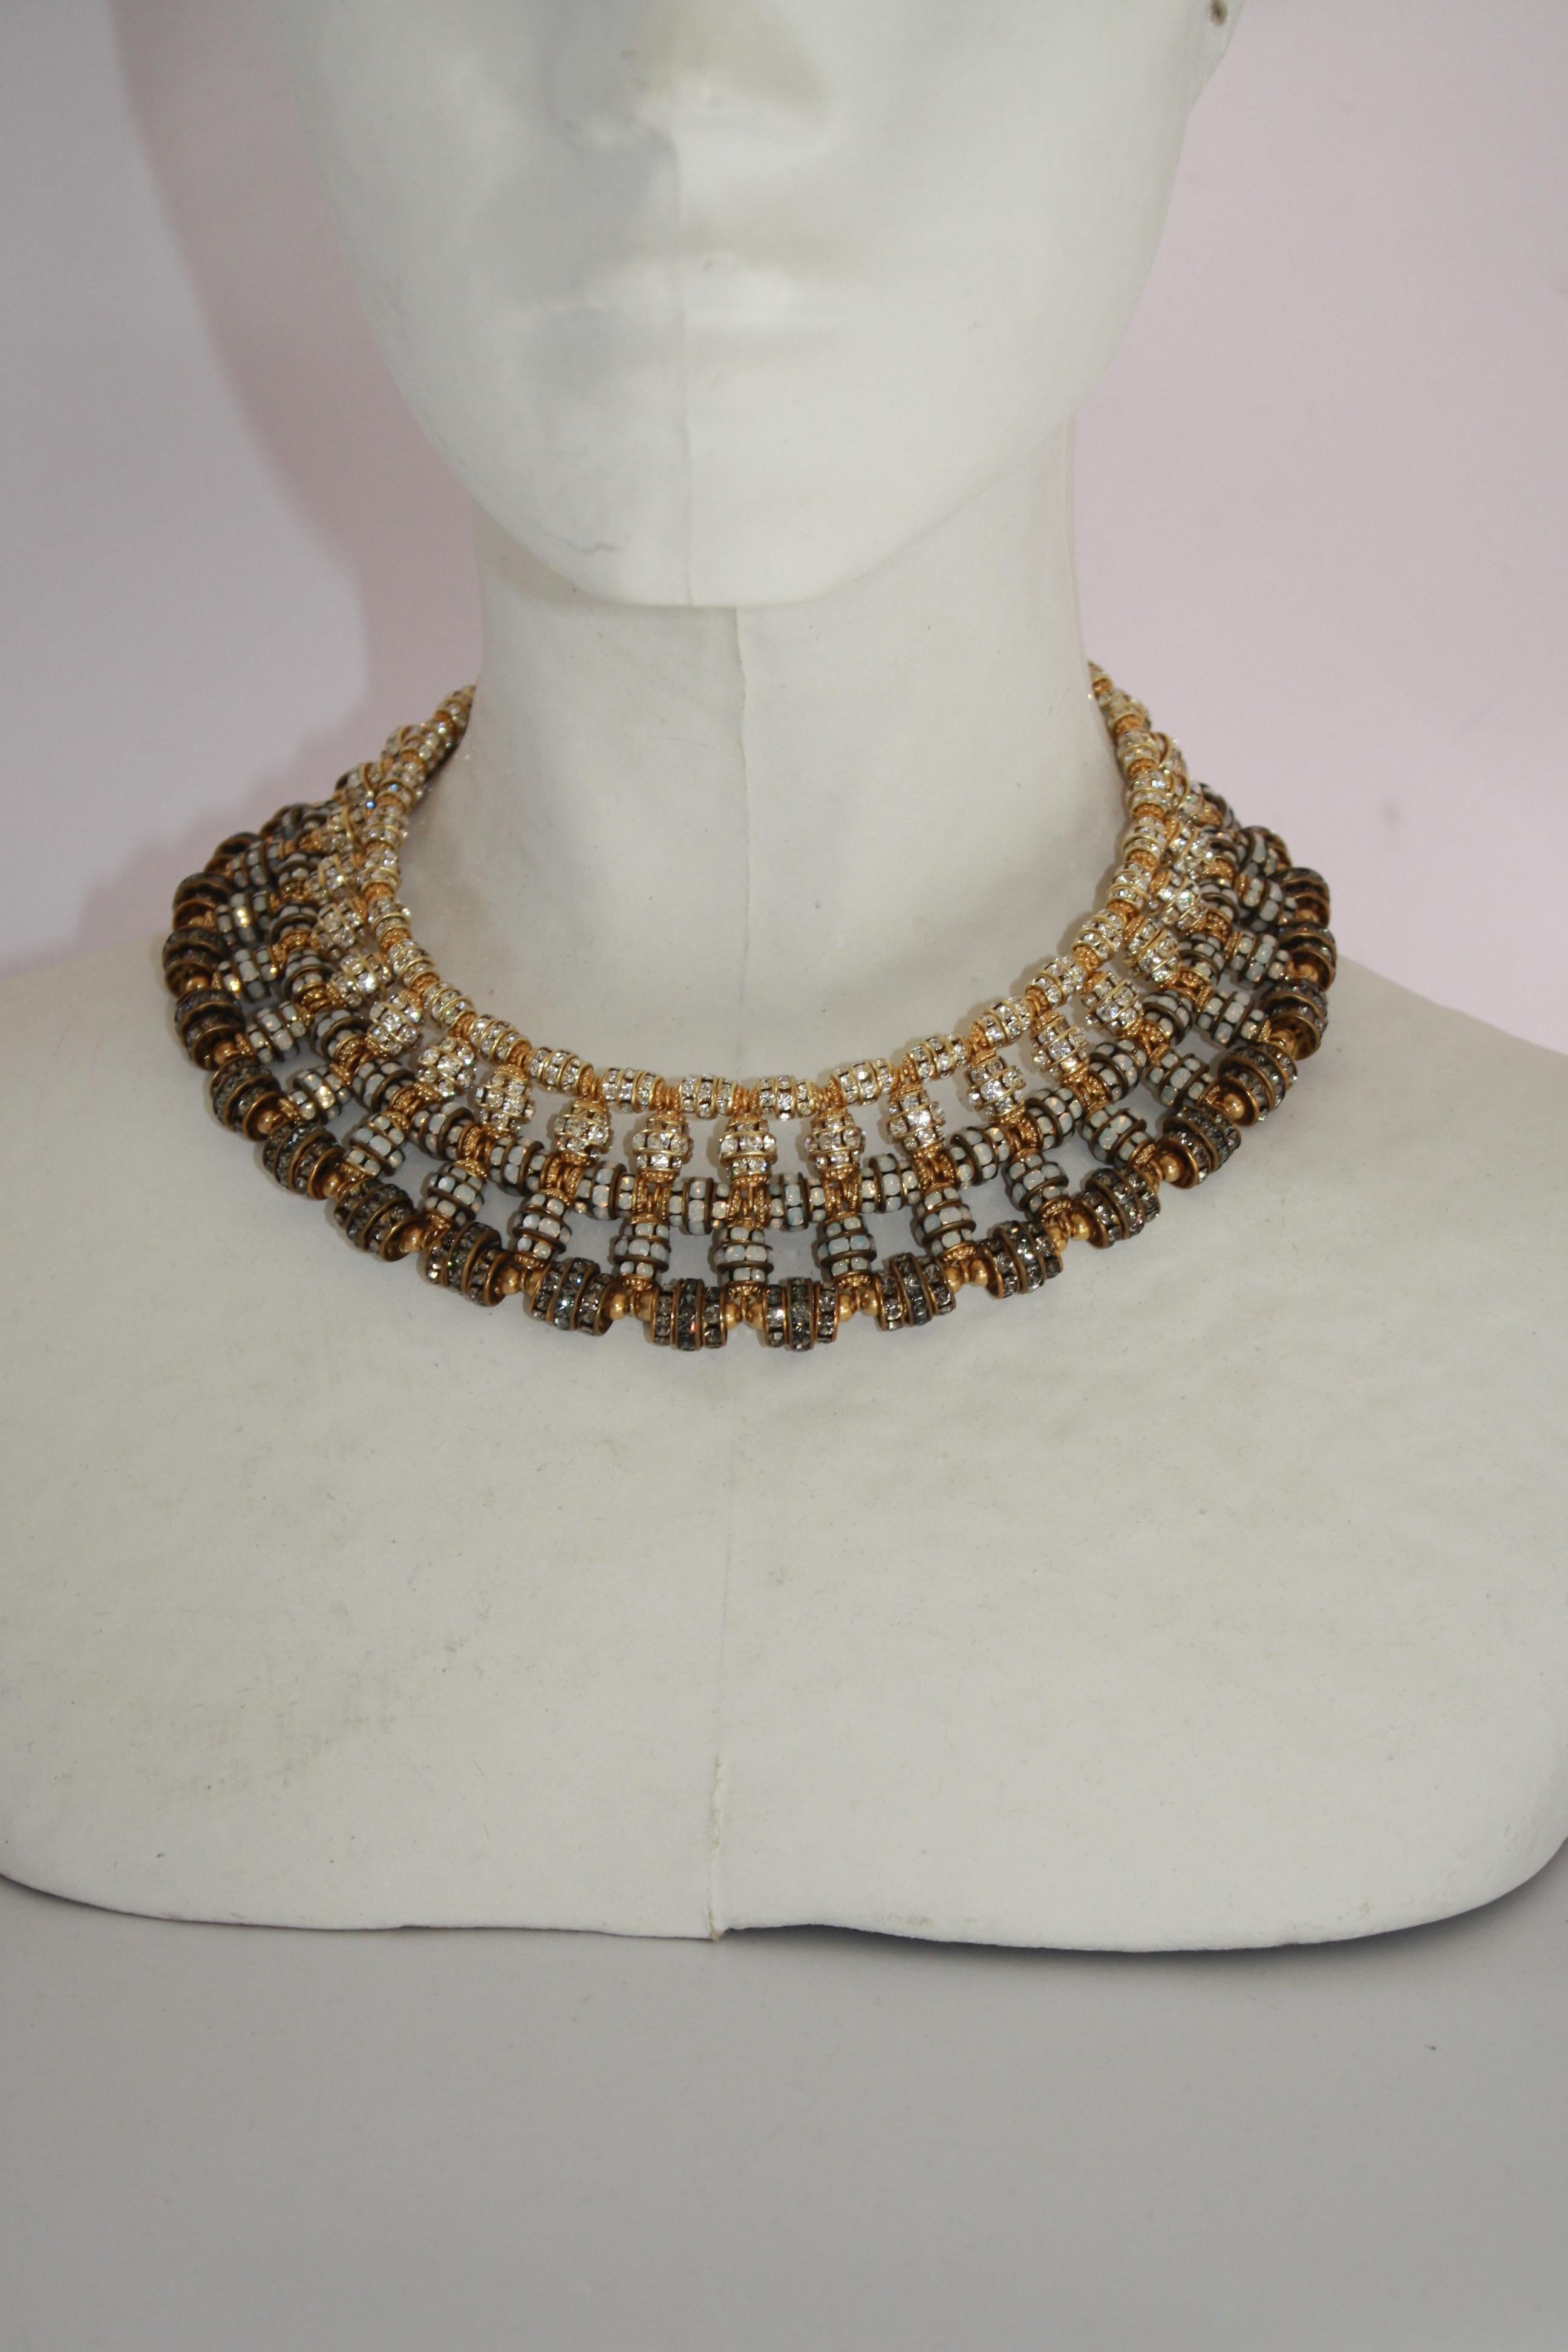 Triple tone Swarovski Crystal rondelle choker necklace from French designer Francoise Montague. 

15” plus 3” extension
1 1/2” wide 